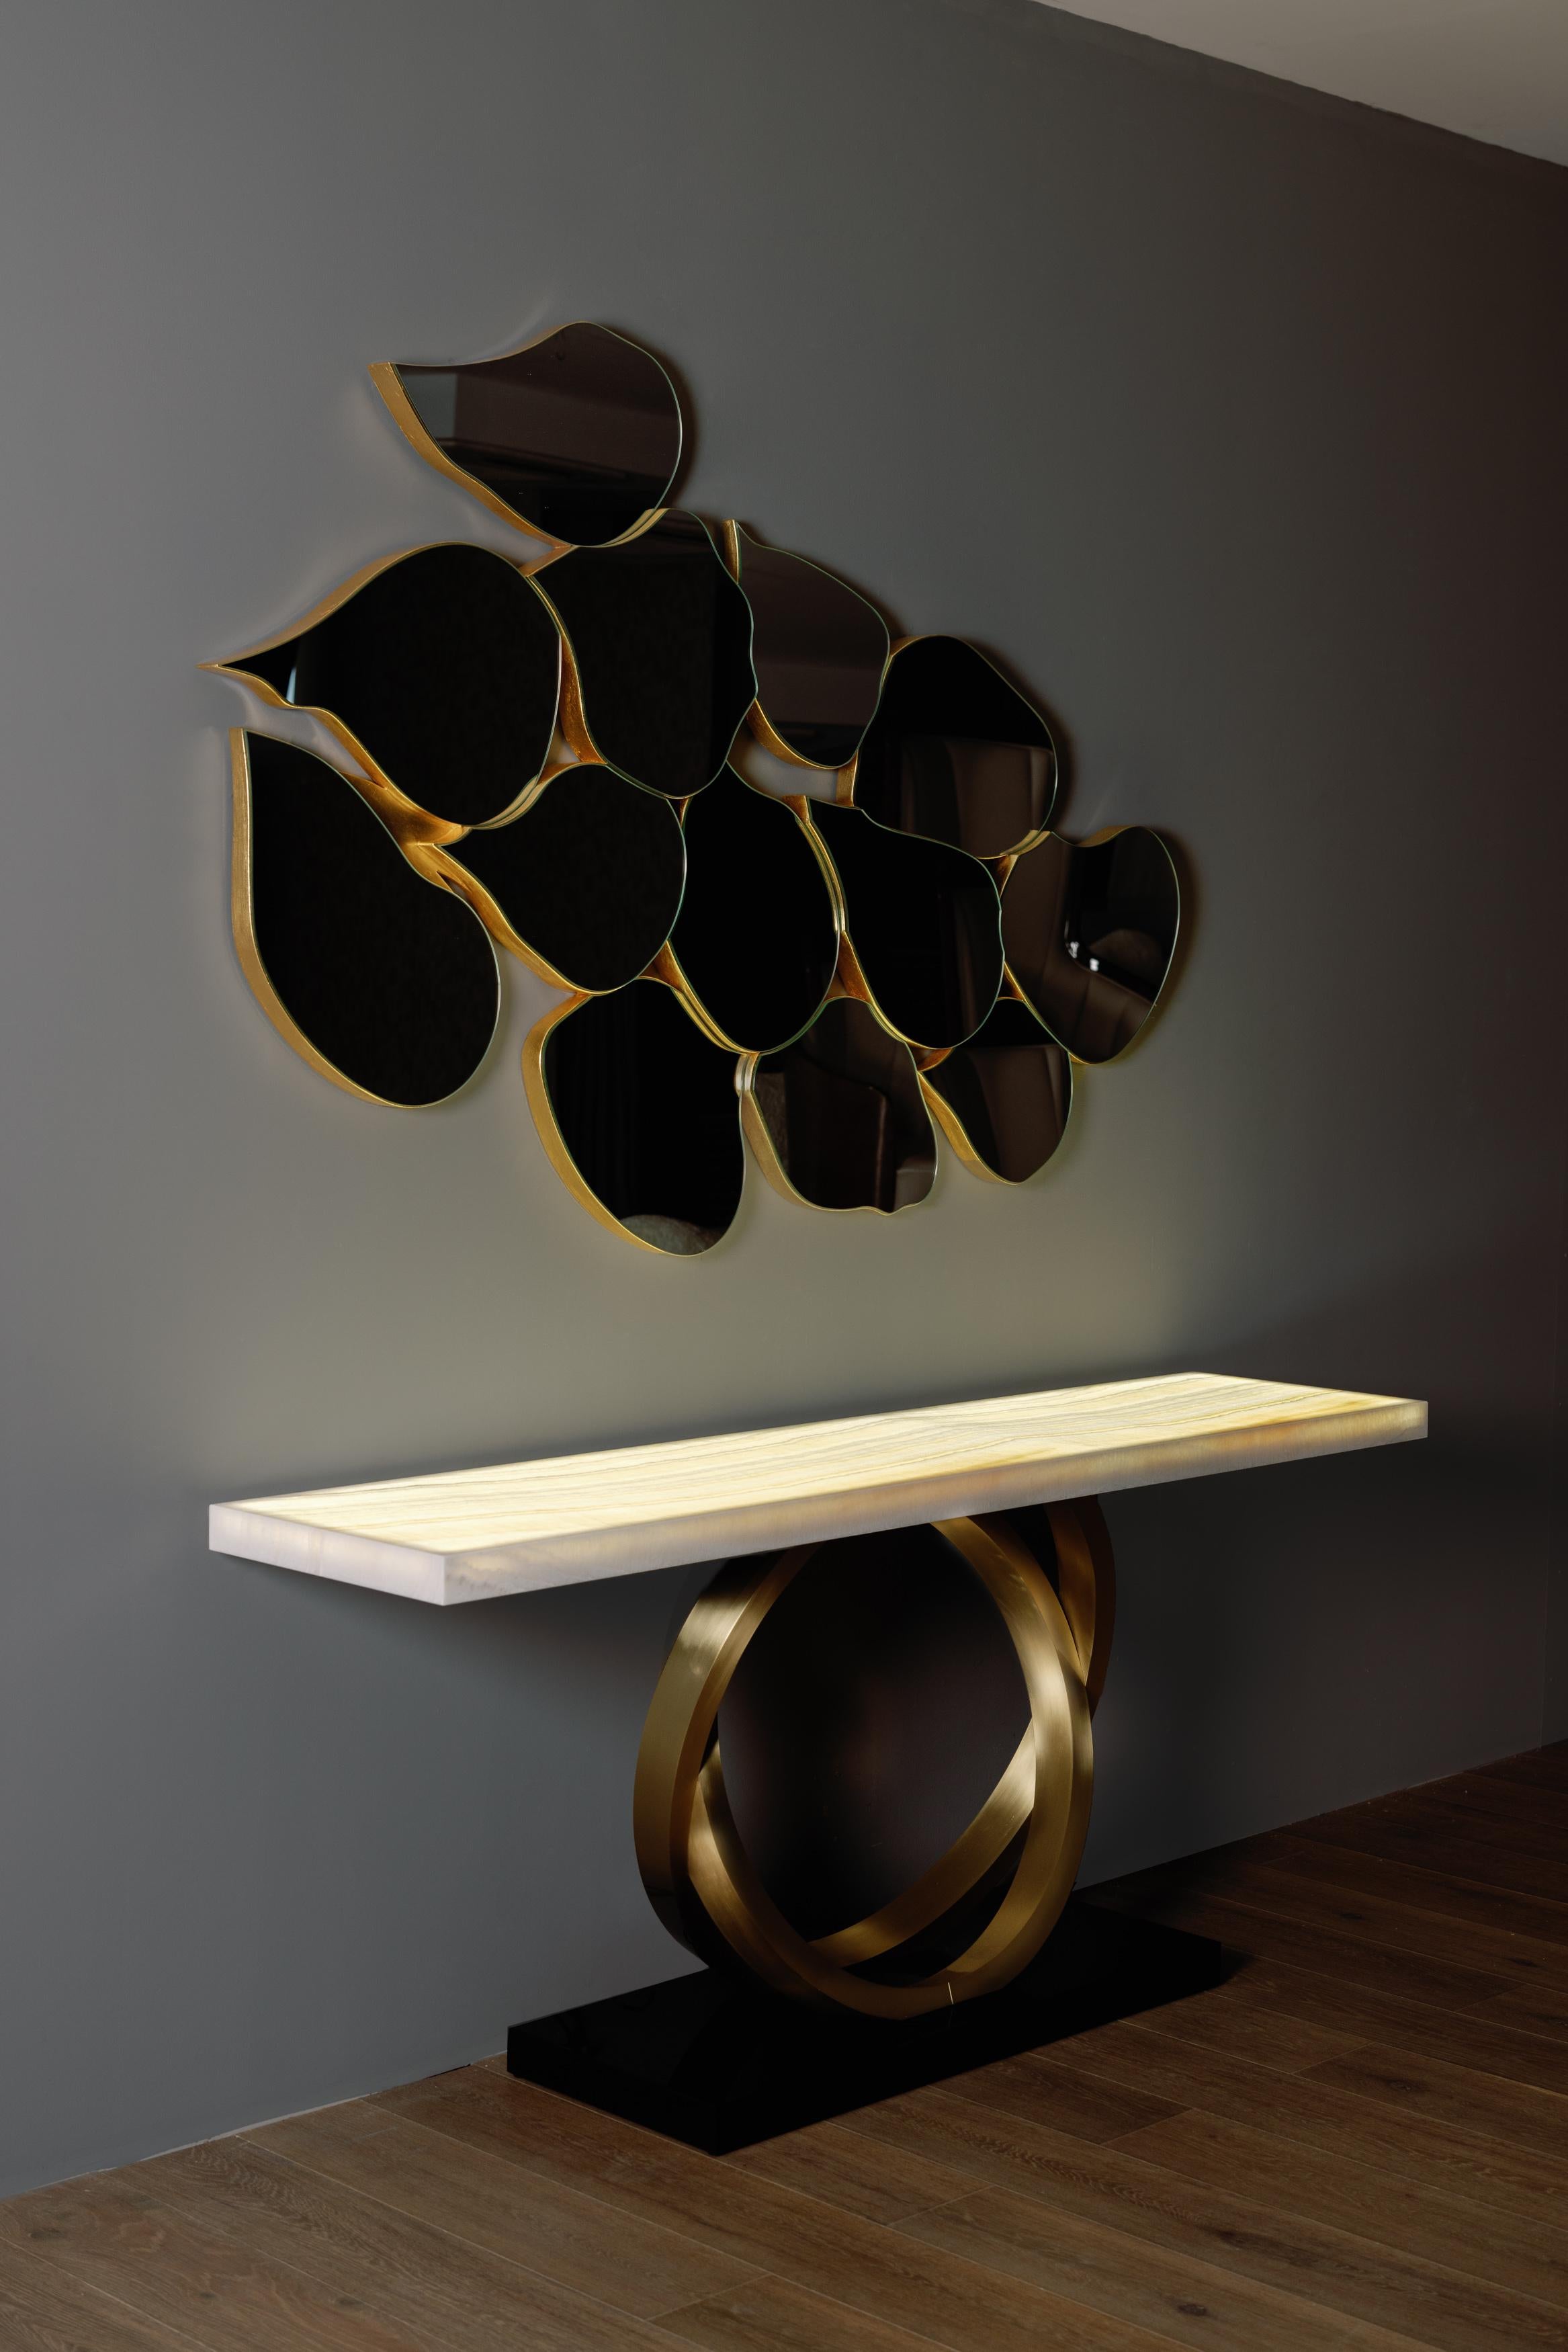 Armilar console table, Modern Collection, handcrafted in Portugal - Europe by GF Modern.

The Armilar console table has a modern design that pays homage to the Portuguese armillary sphere, an instrument that allowed Portuguese navigators to sail